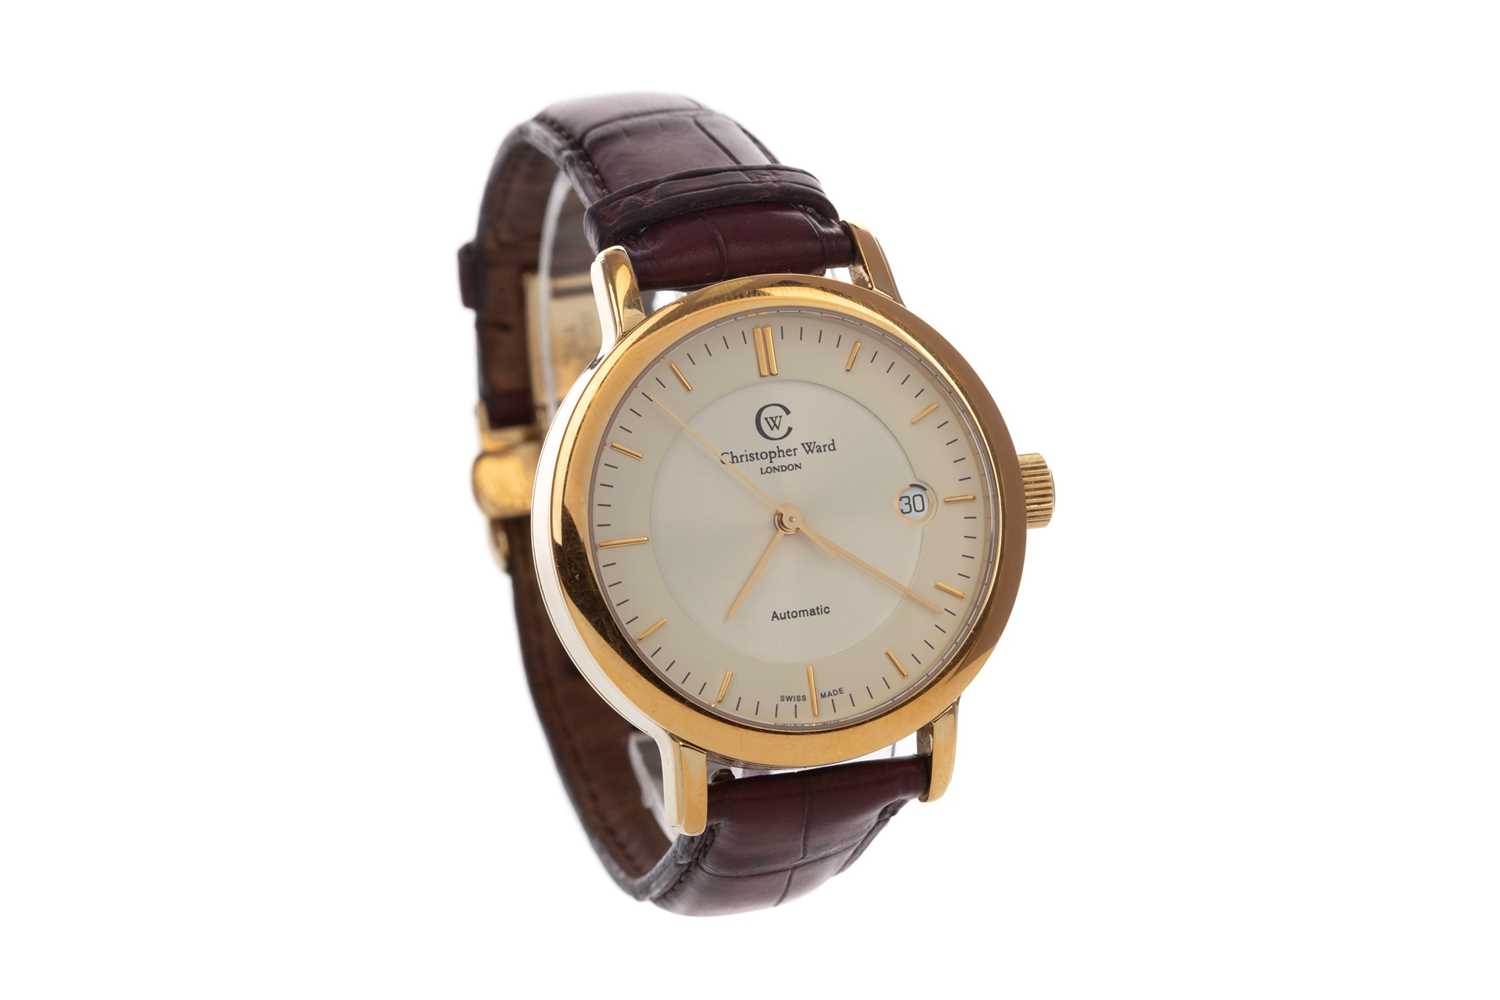 Lot 720 - A GENTLEMAN'S CHRISTOPHER WARD GOLD PLATED AUTOMATIC WRIST WATCH